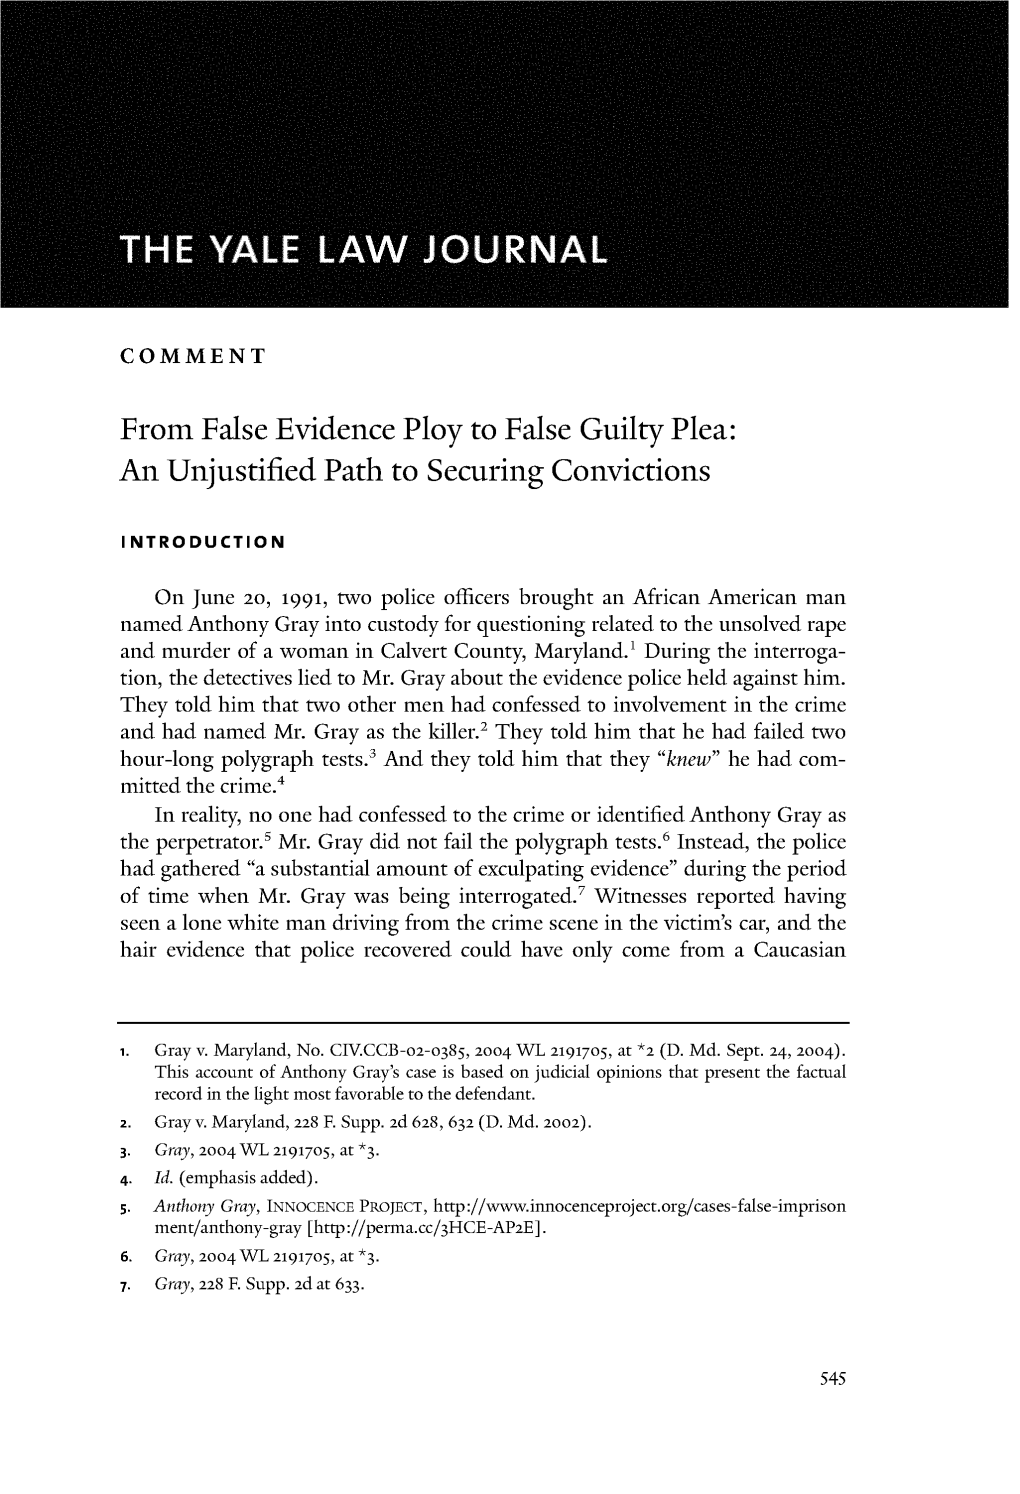 From False Evidence Ploy to False Guilty Plea: an Unjustified Path to Securing Convictions